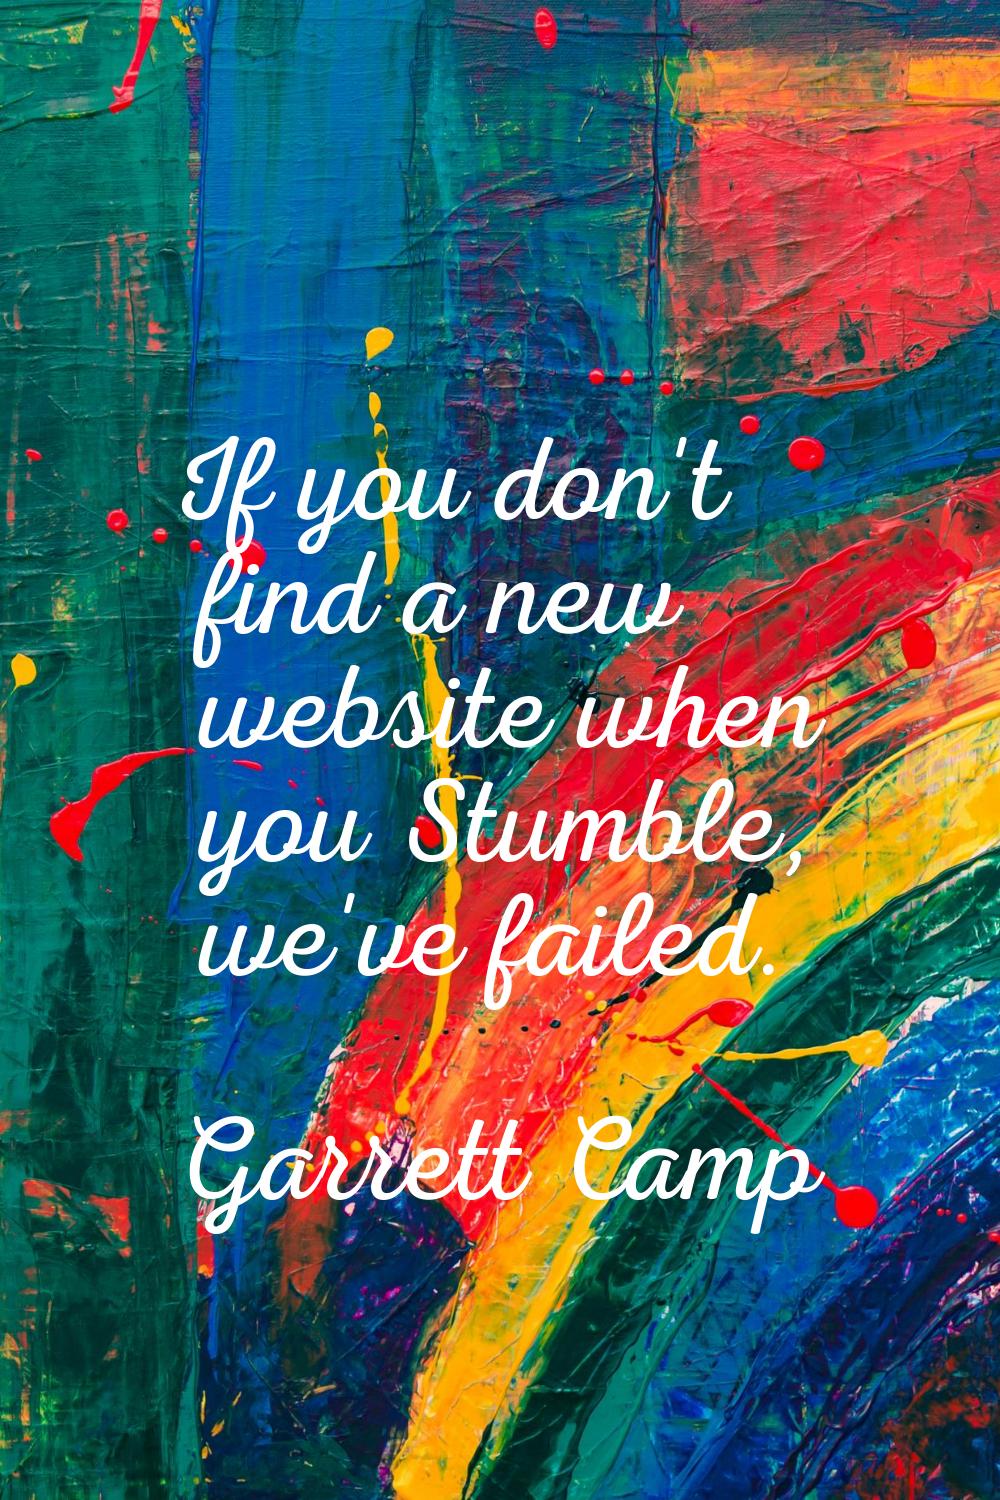 If you don't find a new website when you Stumble, we've failed.